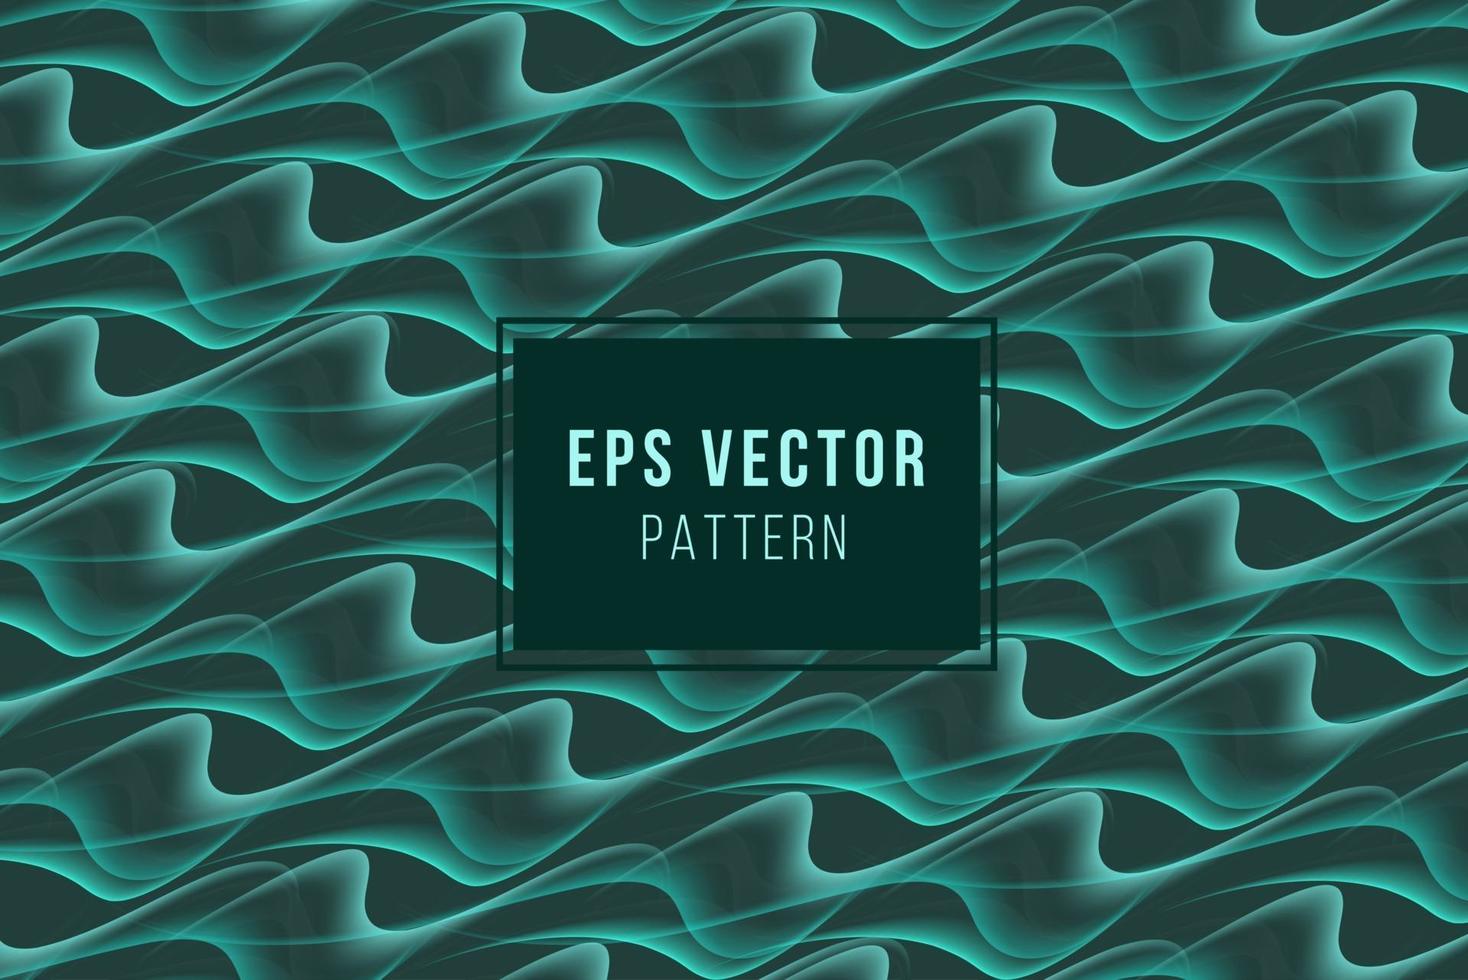 Green pattern background shiny eps vector editable abstract